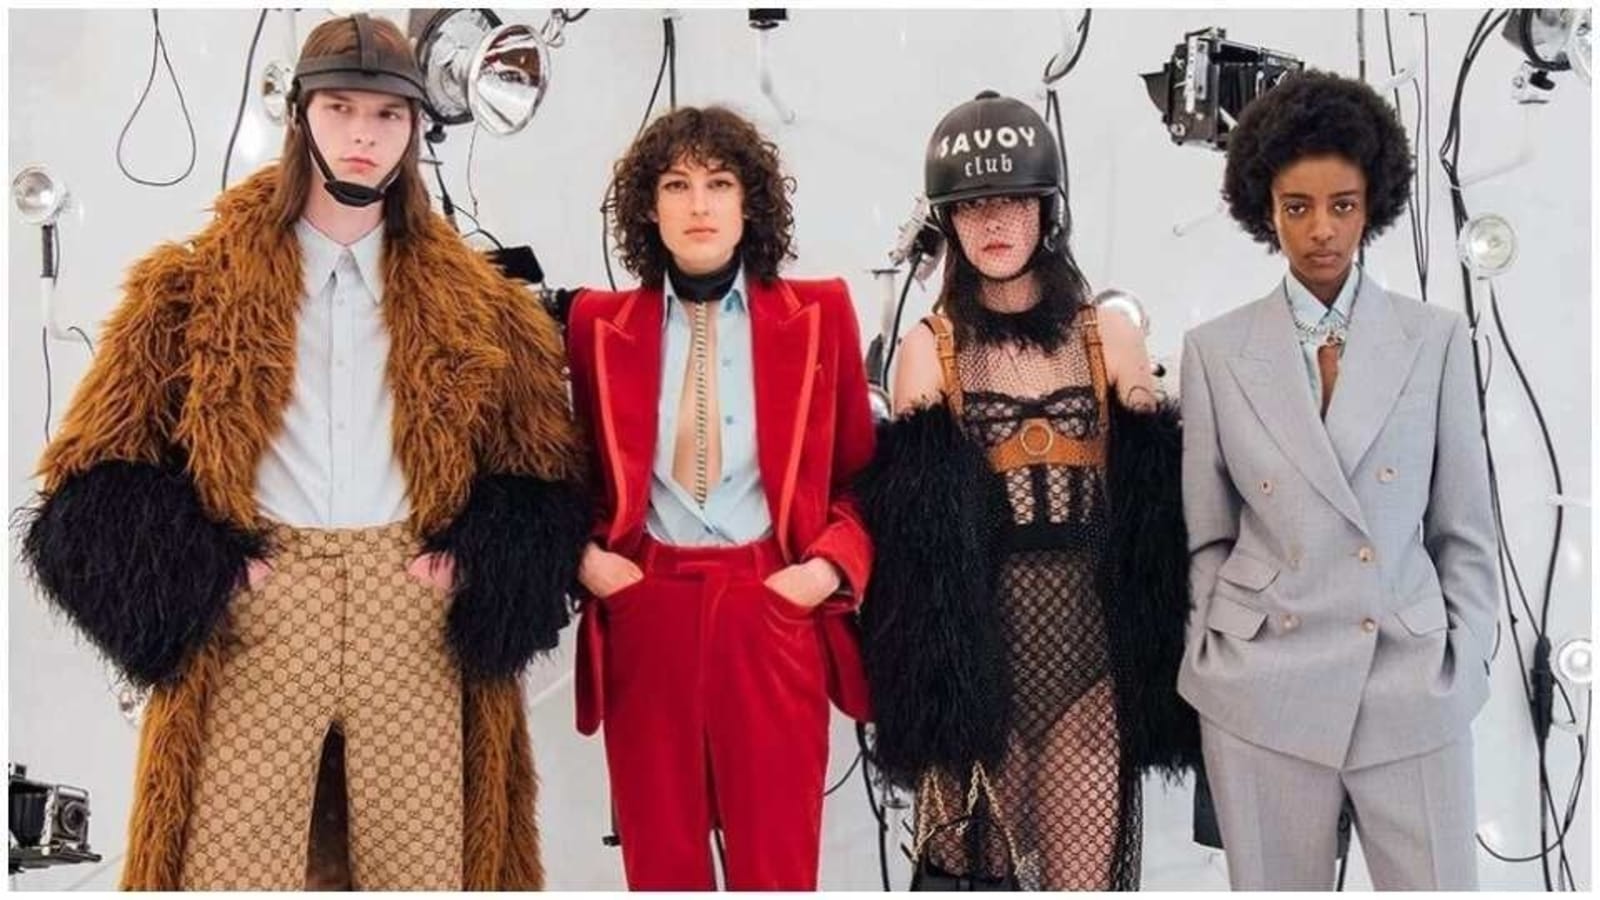 100 years of luxury fashion house Gucci celebrated with Balenciaga collab,  Tom Ford references in Aria collection by Alessandro Michele